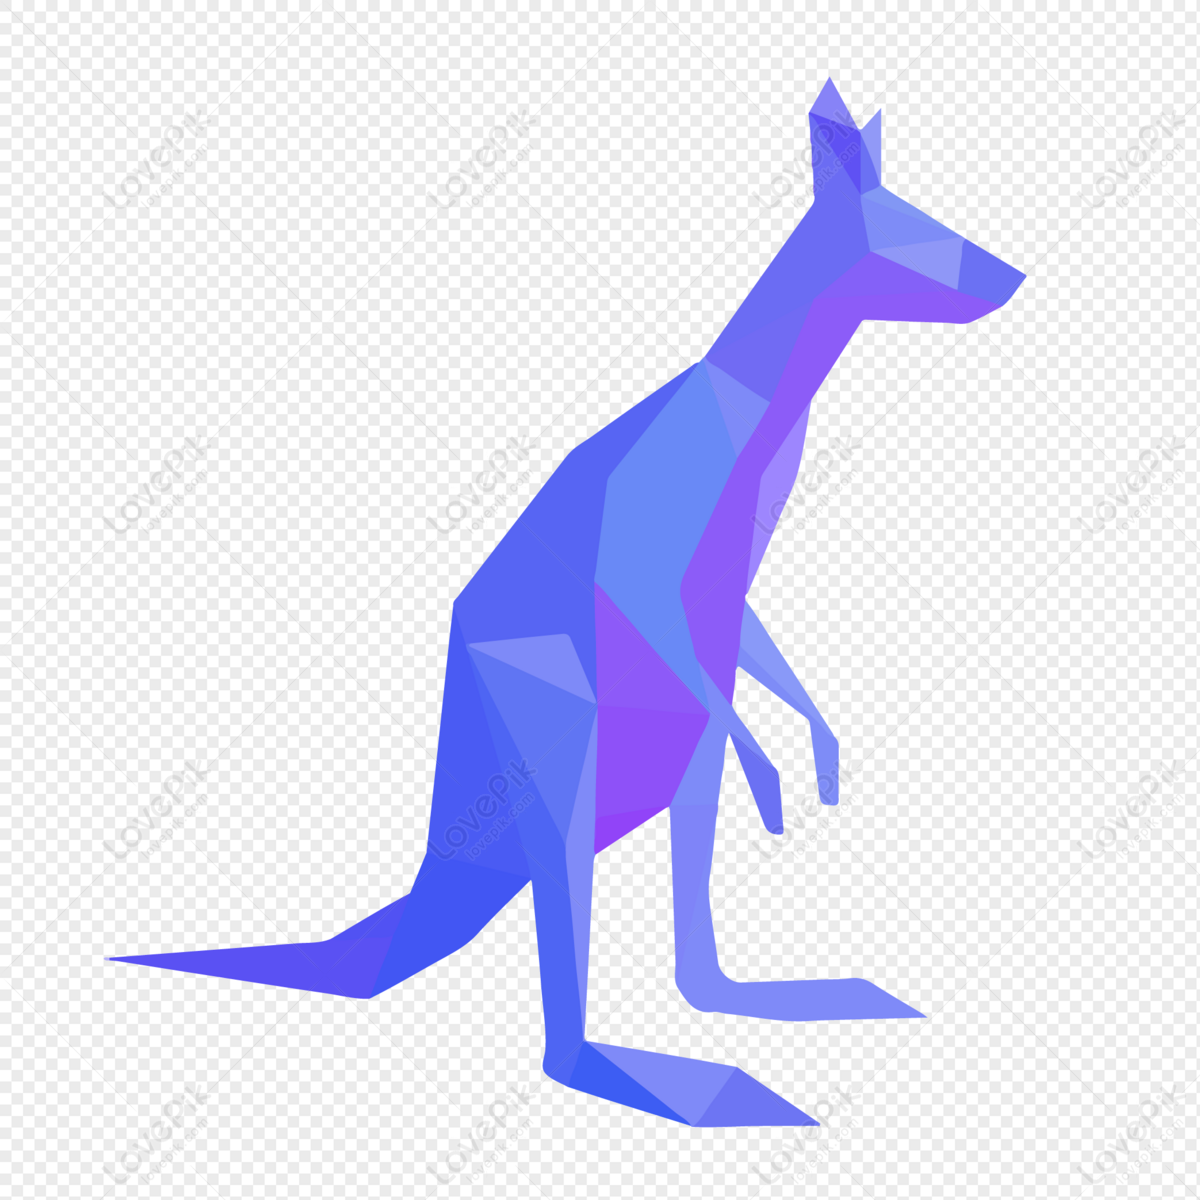 Crystal Kangaroo Side Cartoon PNG White Transparent And Clipart Image For  Free Download - Lovepik | 401290612